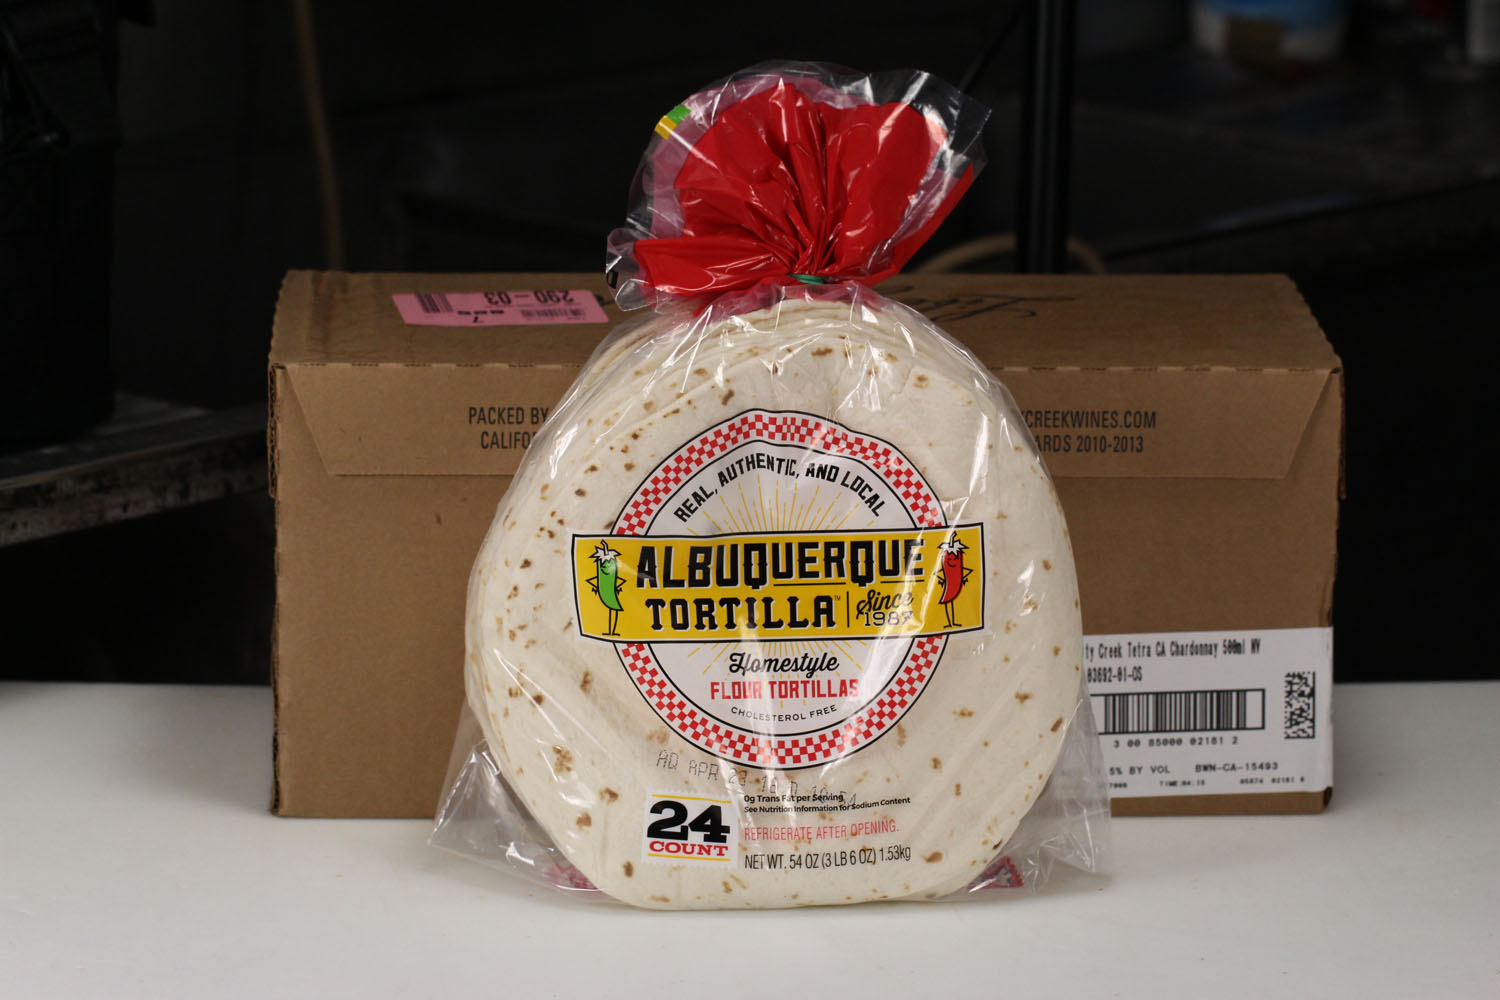 This image icon displays the Purdy's Quality Meats Homestyle Flour 24 pack New Mexico Albuquerque Tortillas image